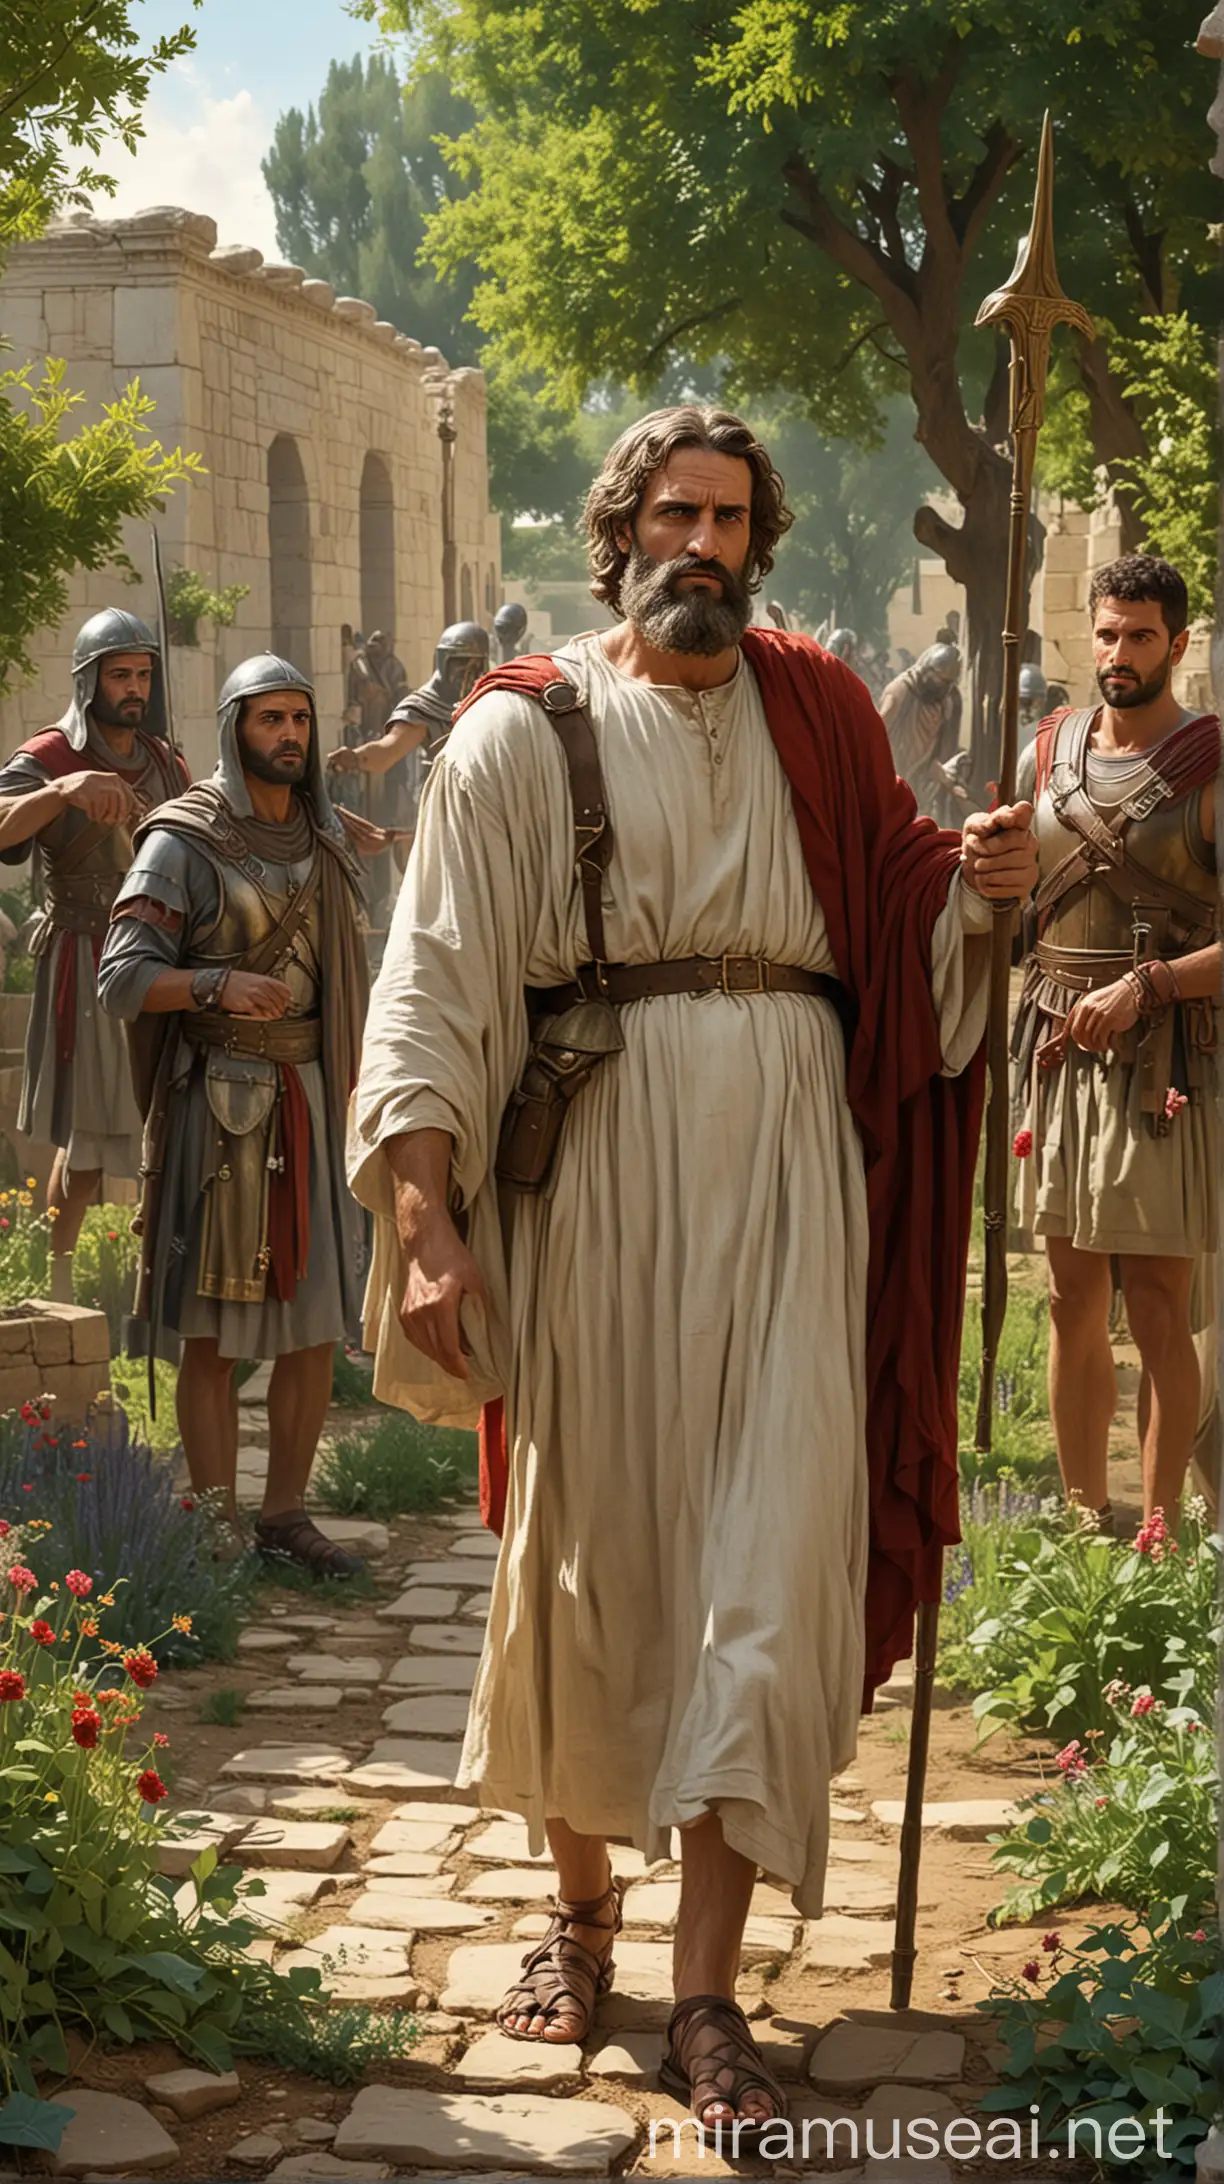 Illustrate Malchus a Greek man, a servant of the High Priest, accompanying armed Roman soldier and Temple guards to apprehend Jesus in the garden.In ancient world